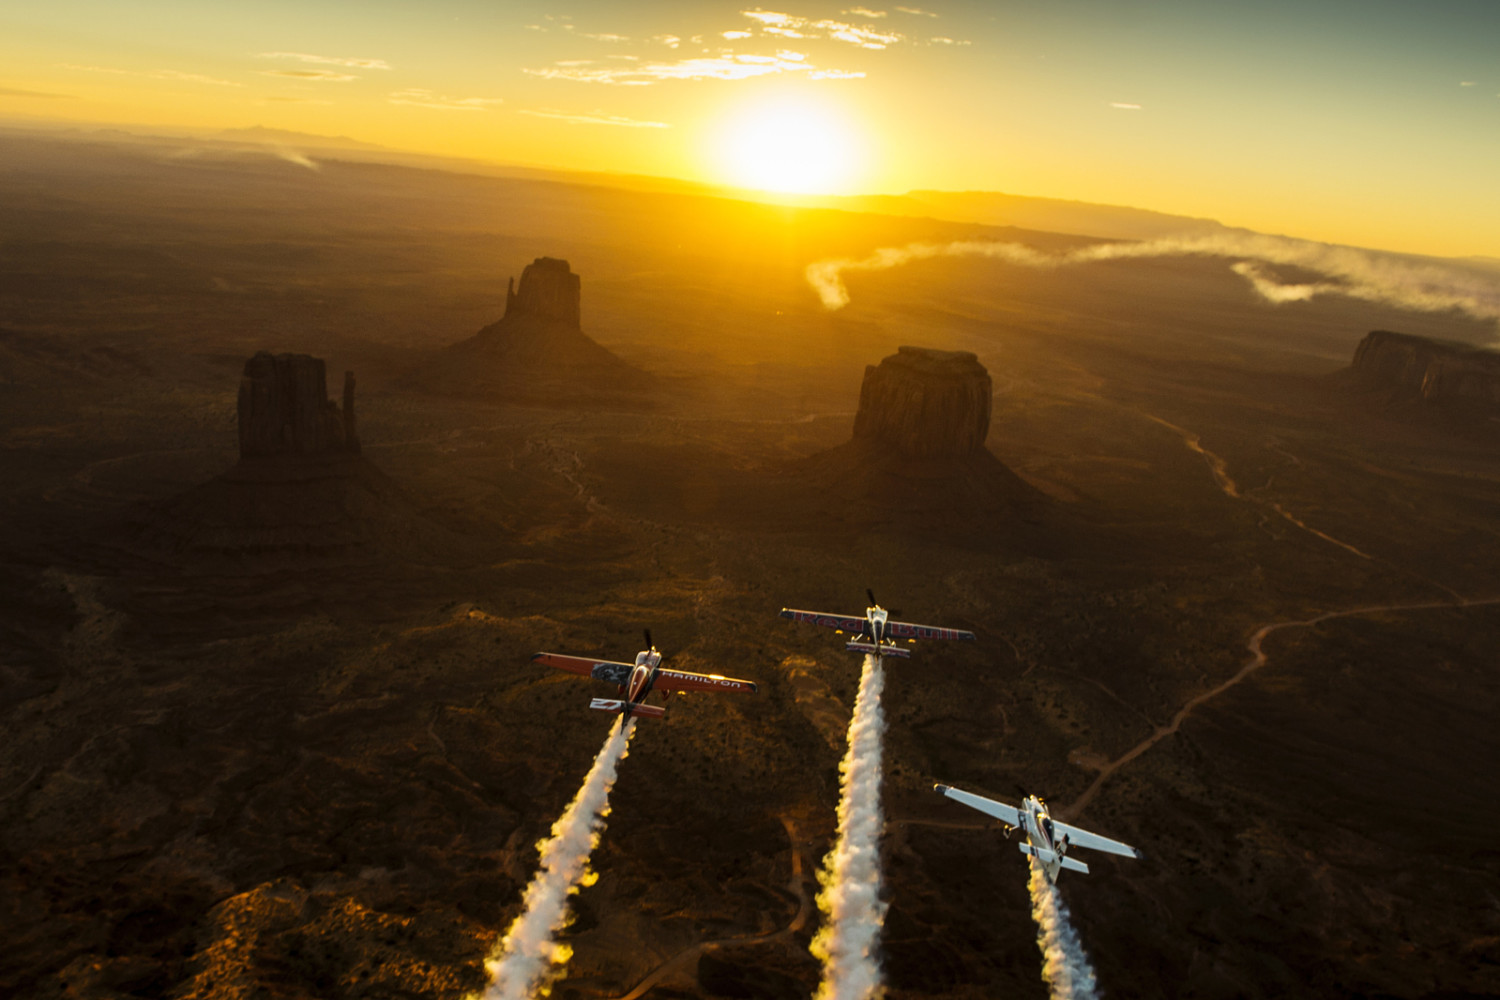 Pilots Fly Over Monument Valley in Epic Sunset Photo